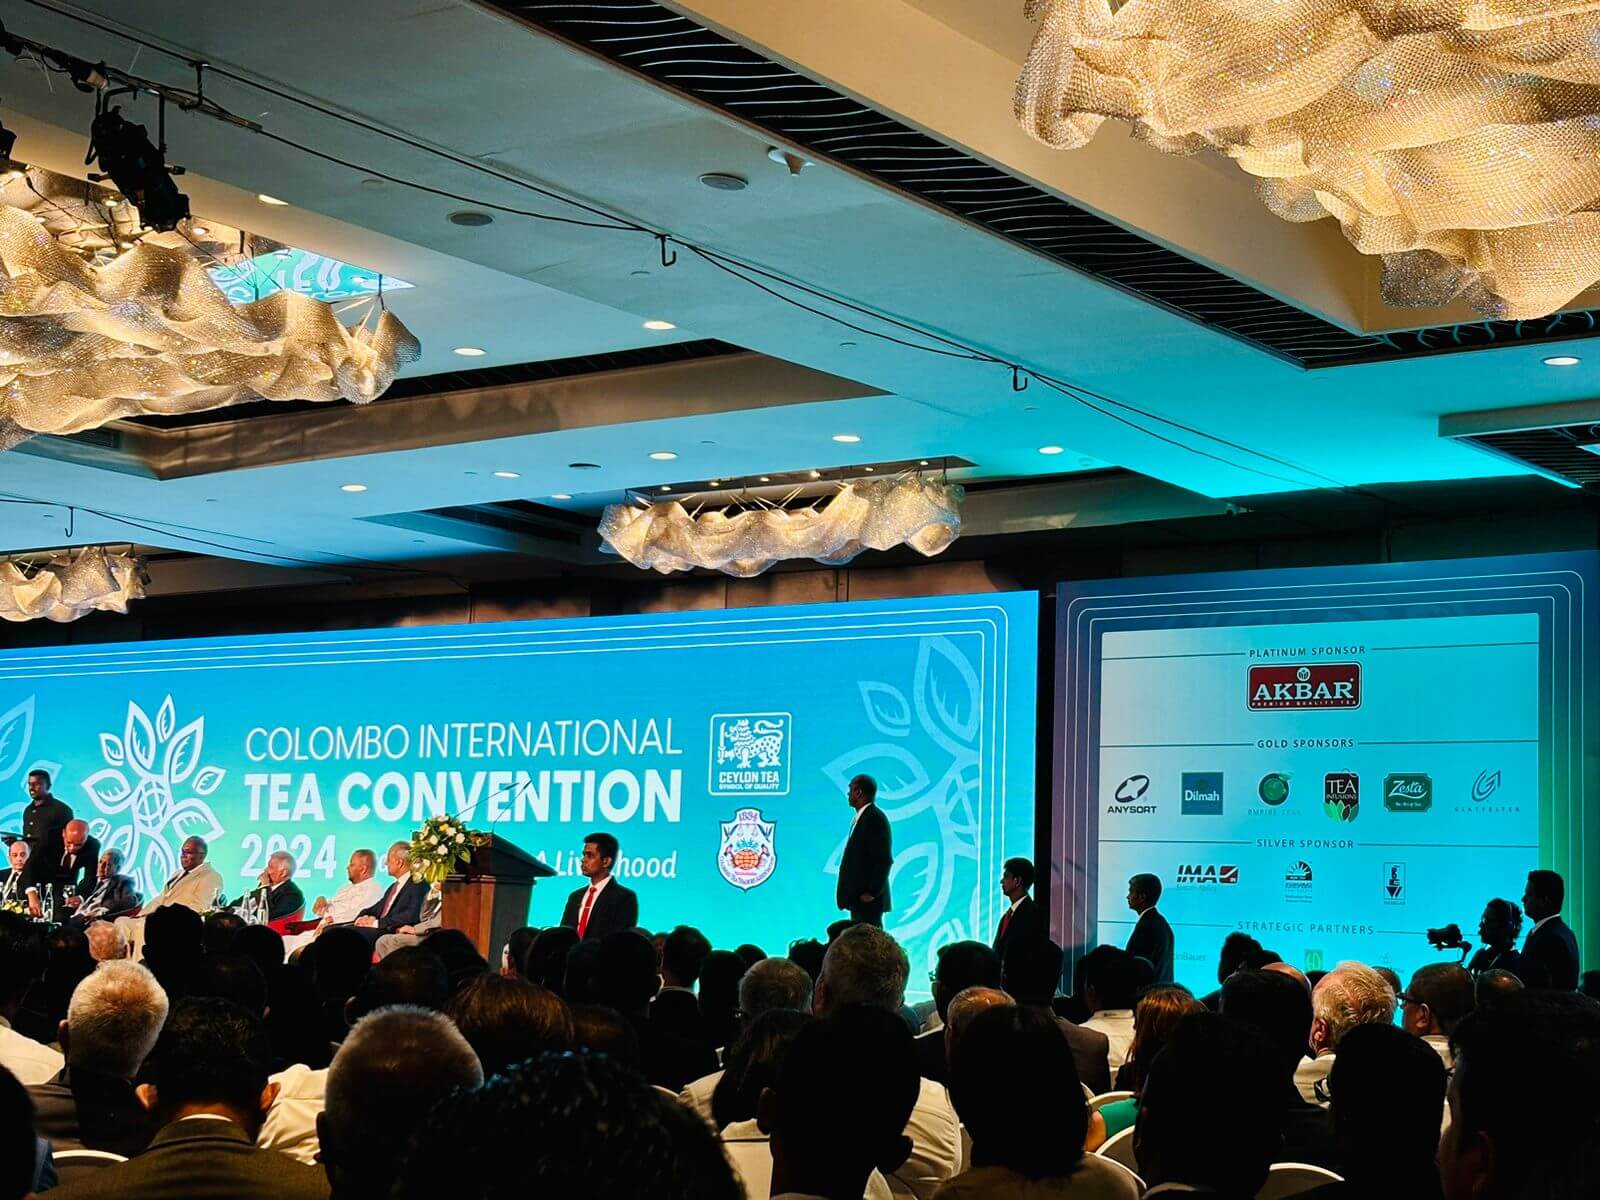 We are thrilled to announce our participation as one of the key sponsors of Colombo International Tea Convention 2024!